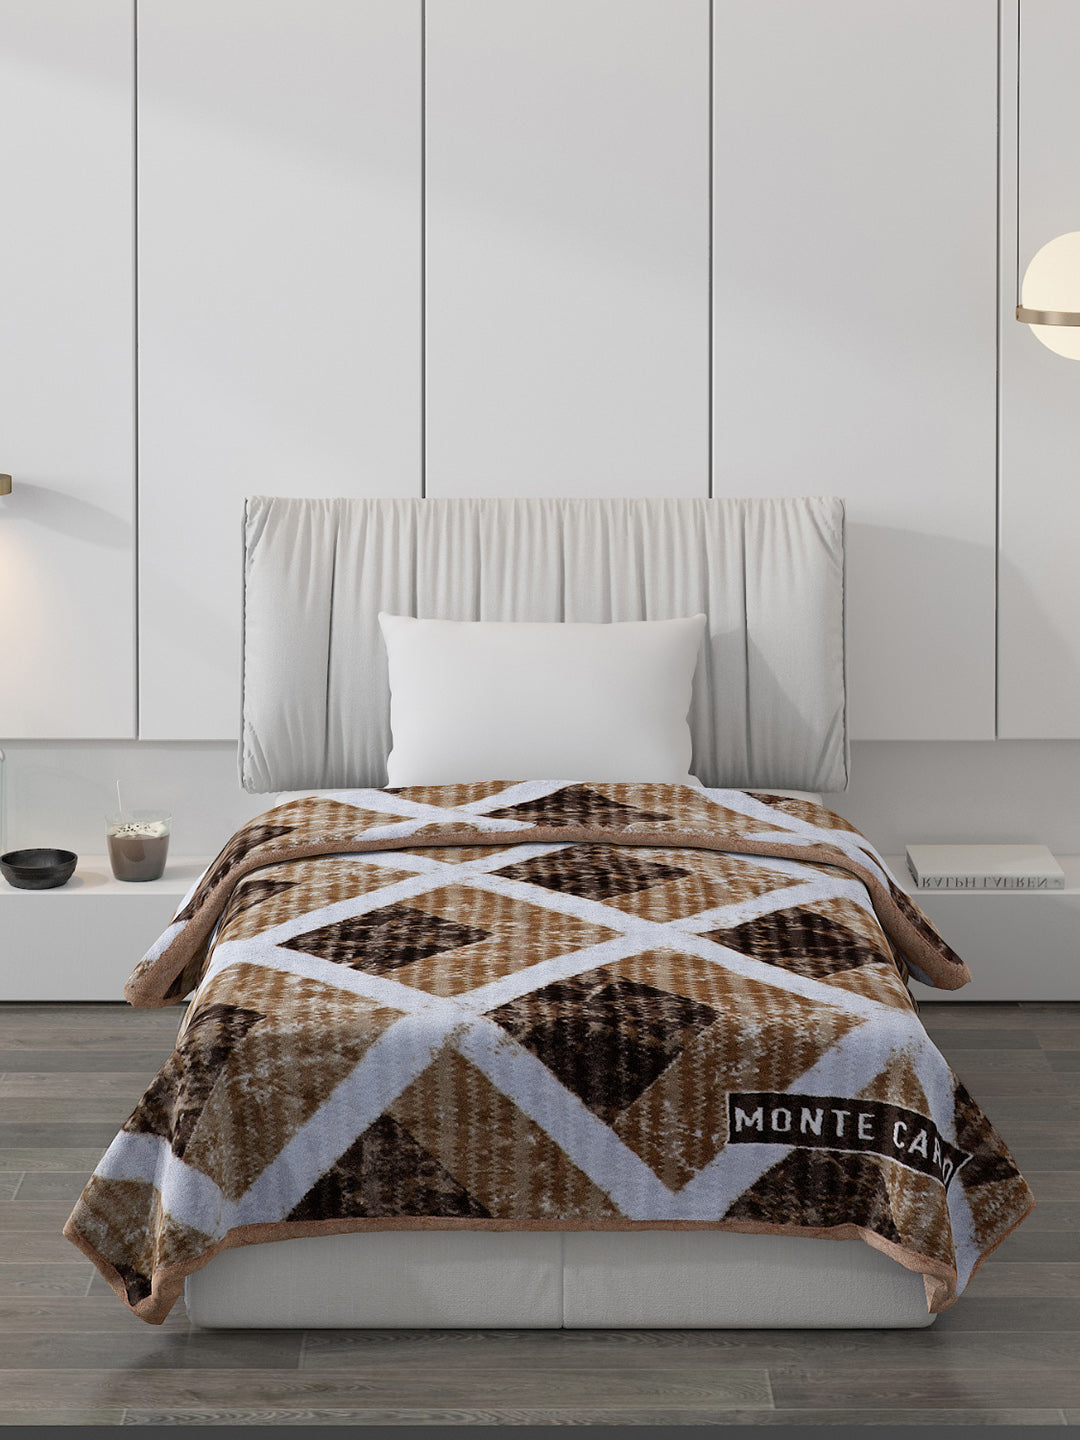 Printed Single Bed Blanket for Heavy Winter -2 Ply